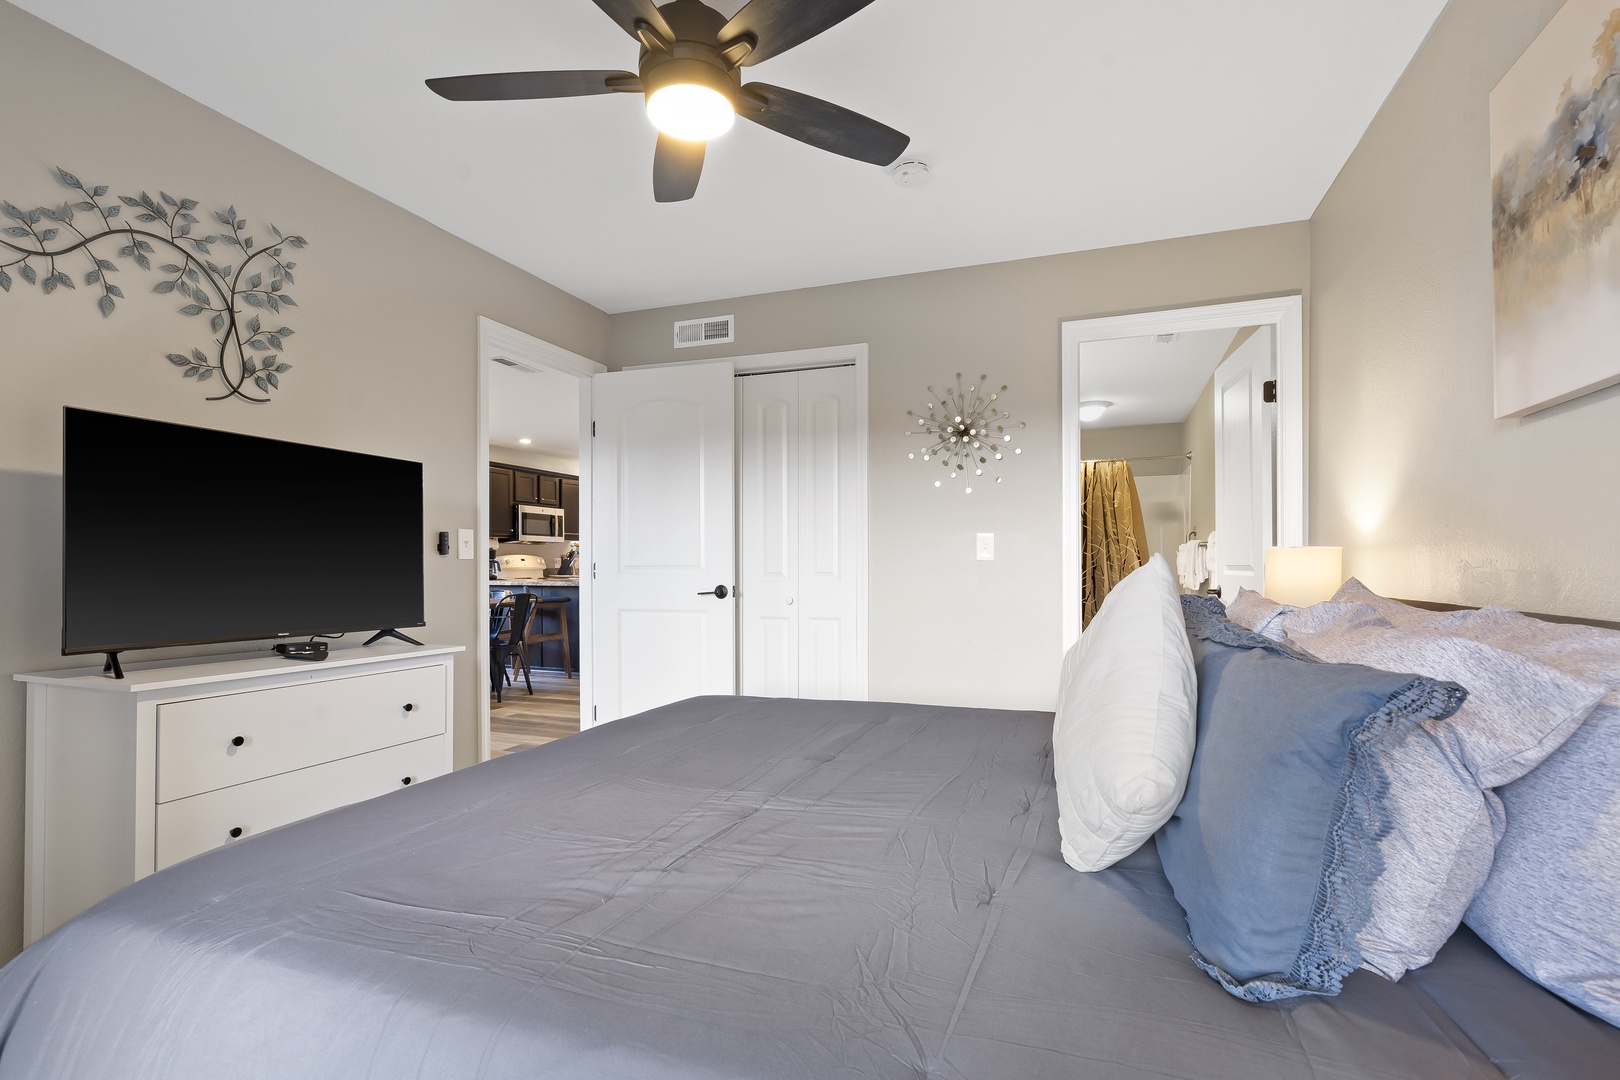 The serene primary suite boasts a king-sized bed, ensuite, TV, & deck access